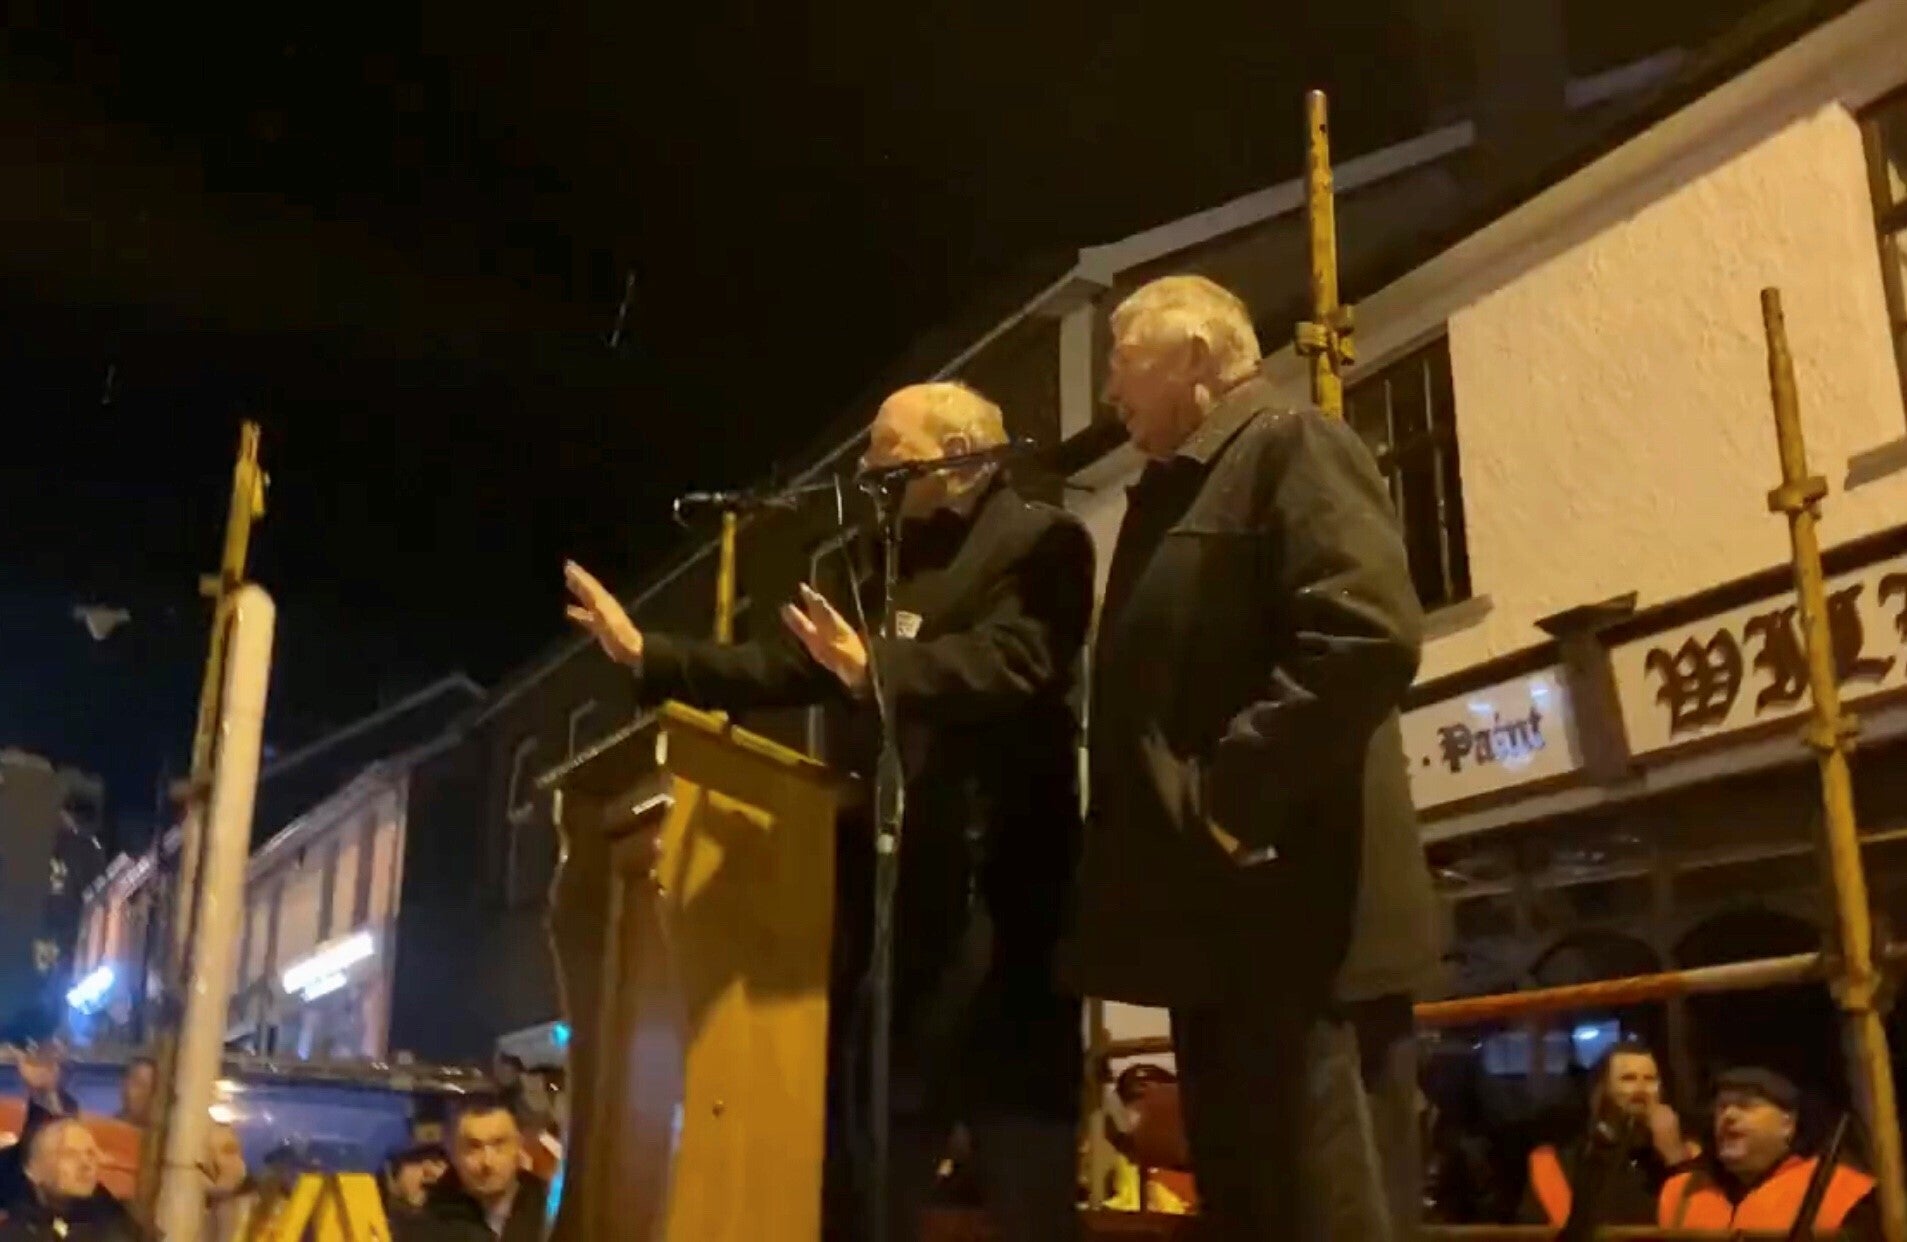 TUV leader Jim Allister (left) intervenes during a speech by DUP MP Sammy Wilson at an anti-NI Protocol rally in Markethill, Co Armagh to appeal to the crowds to stop booing him. Picture date: Friday February 18, 2022.